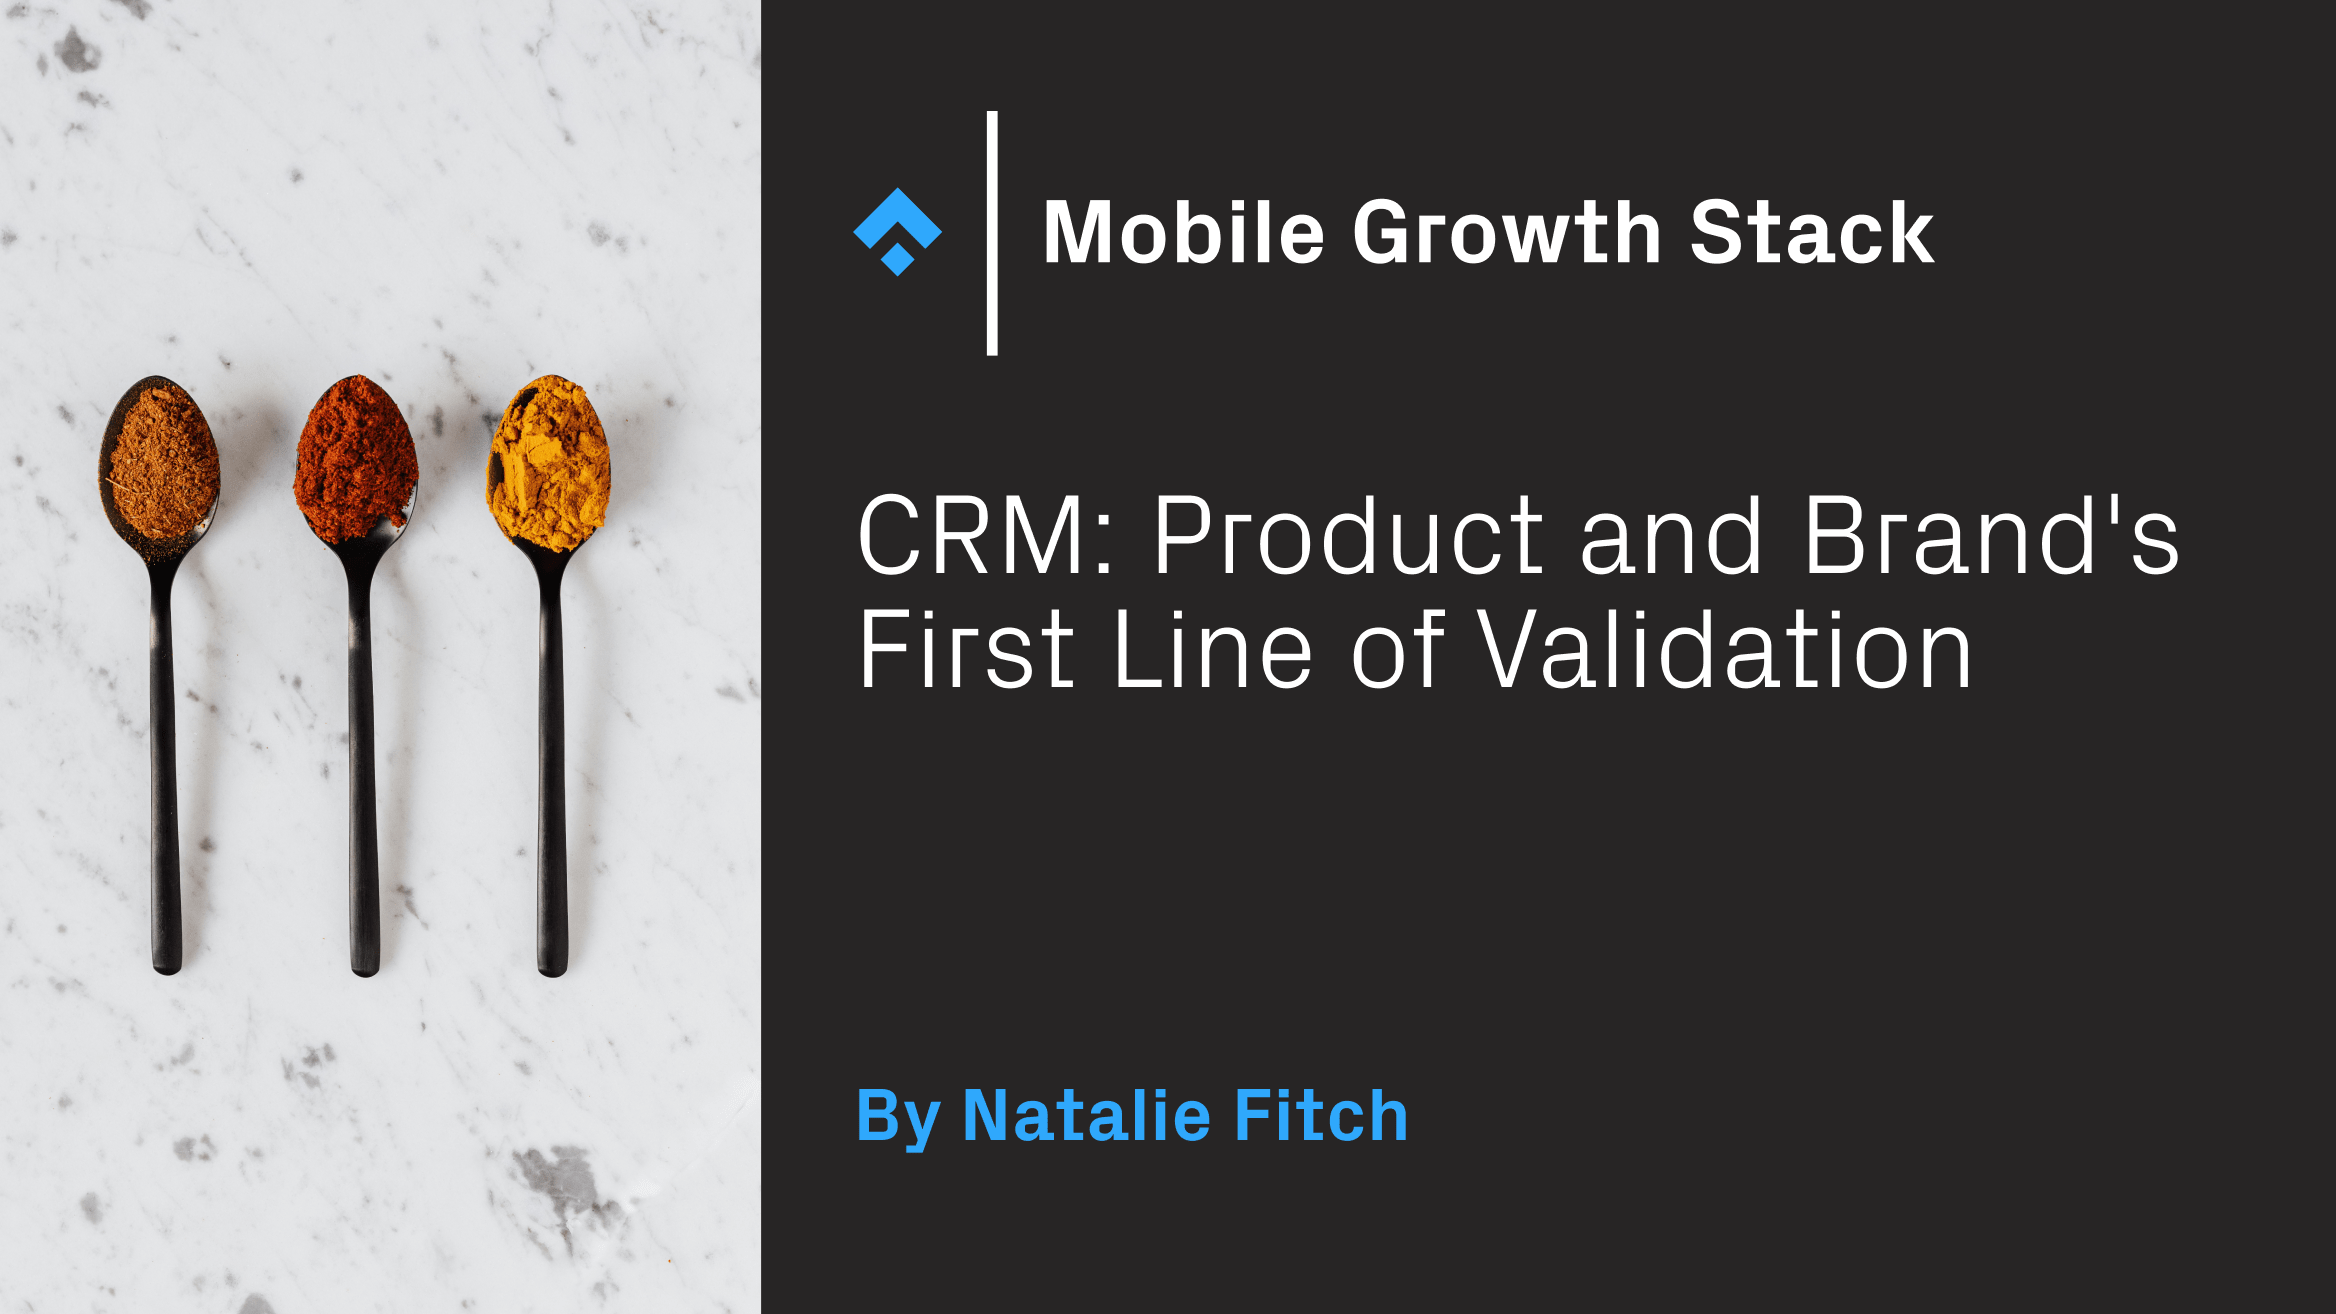 CRM: Product and Brand's first line of validation